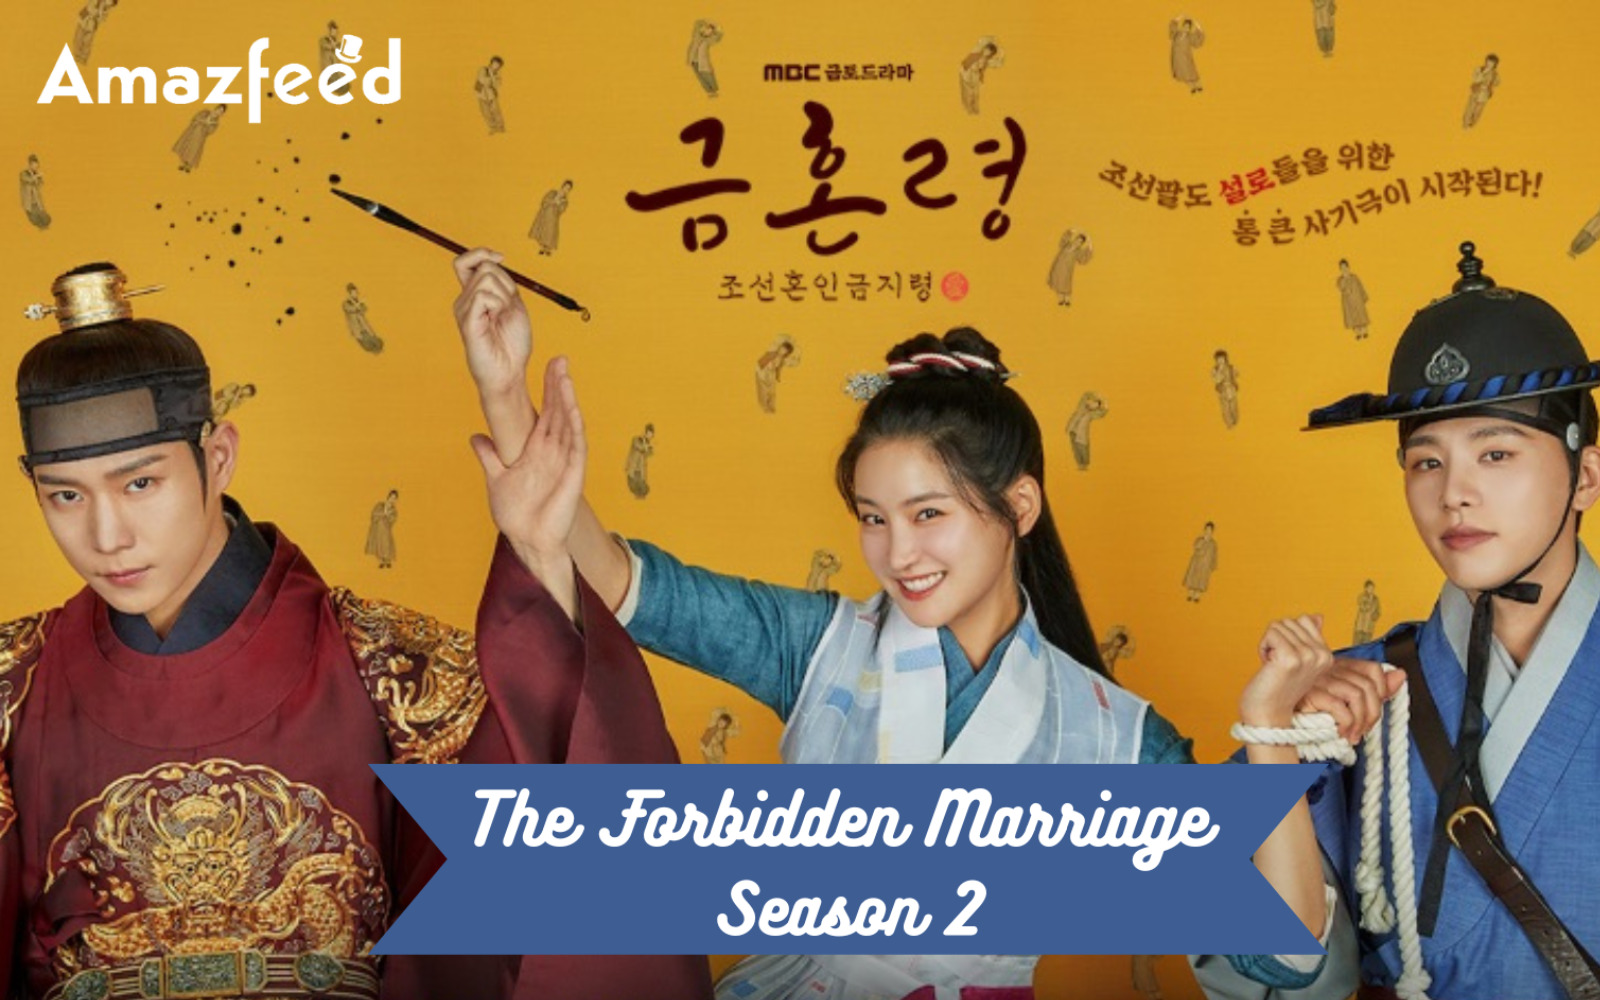 is-the-forbidden-marriage-season-2-confirmed-the-forbidden-marriage